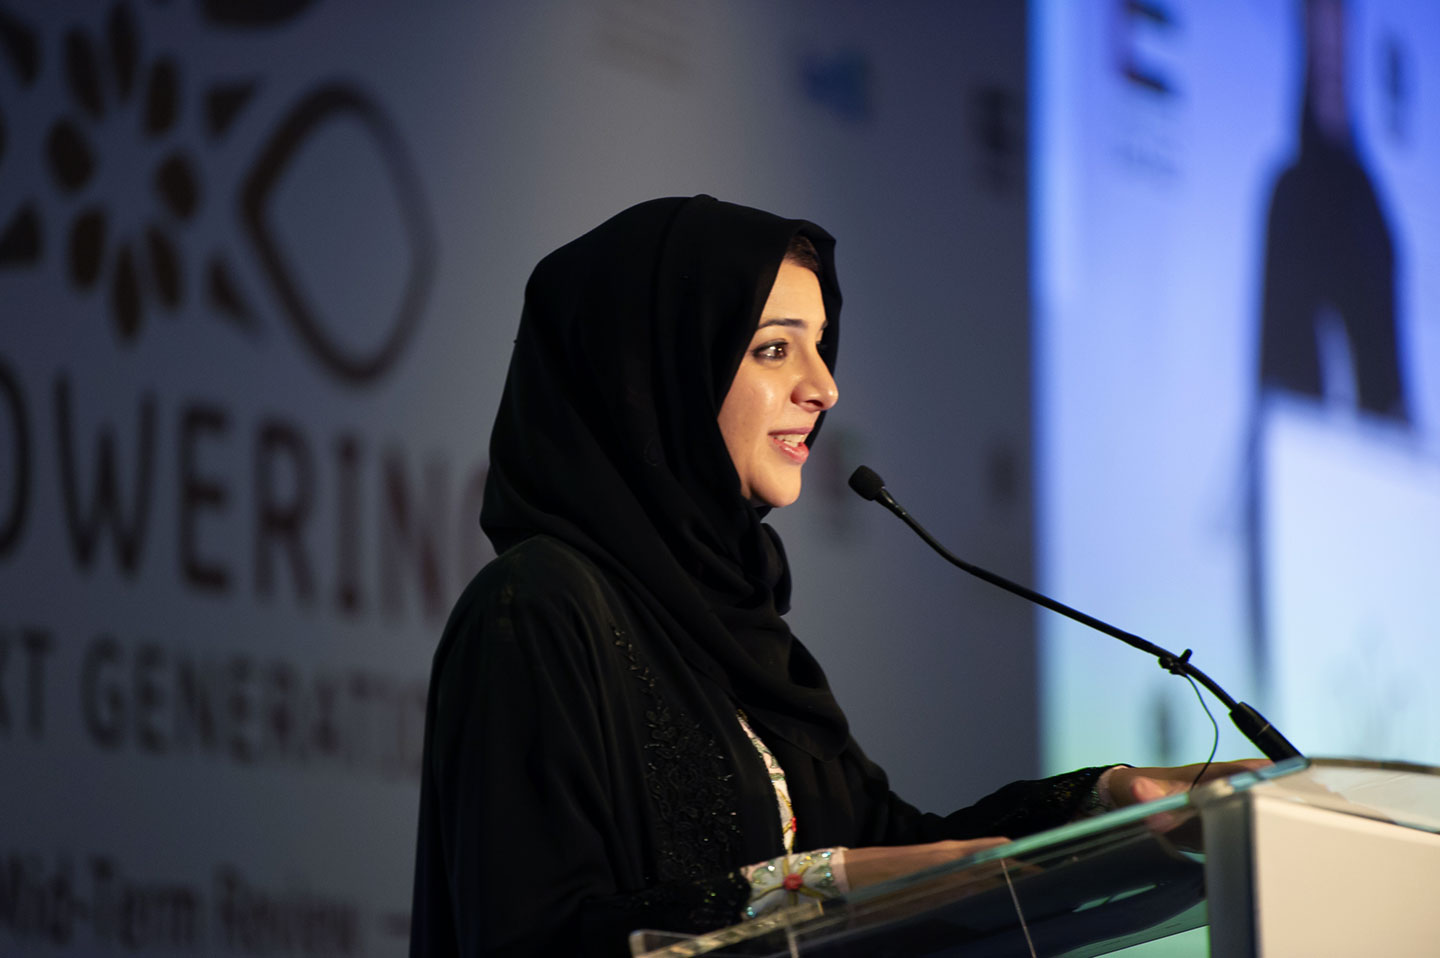 H.E. Reem Al Hashimy, Minister of State for International Cooperation, United Arab Emirates, welcomes attendees to the Mid-Term Review. Credit: Gavi/2018/Oscar Seykens.